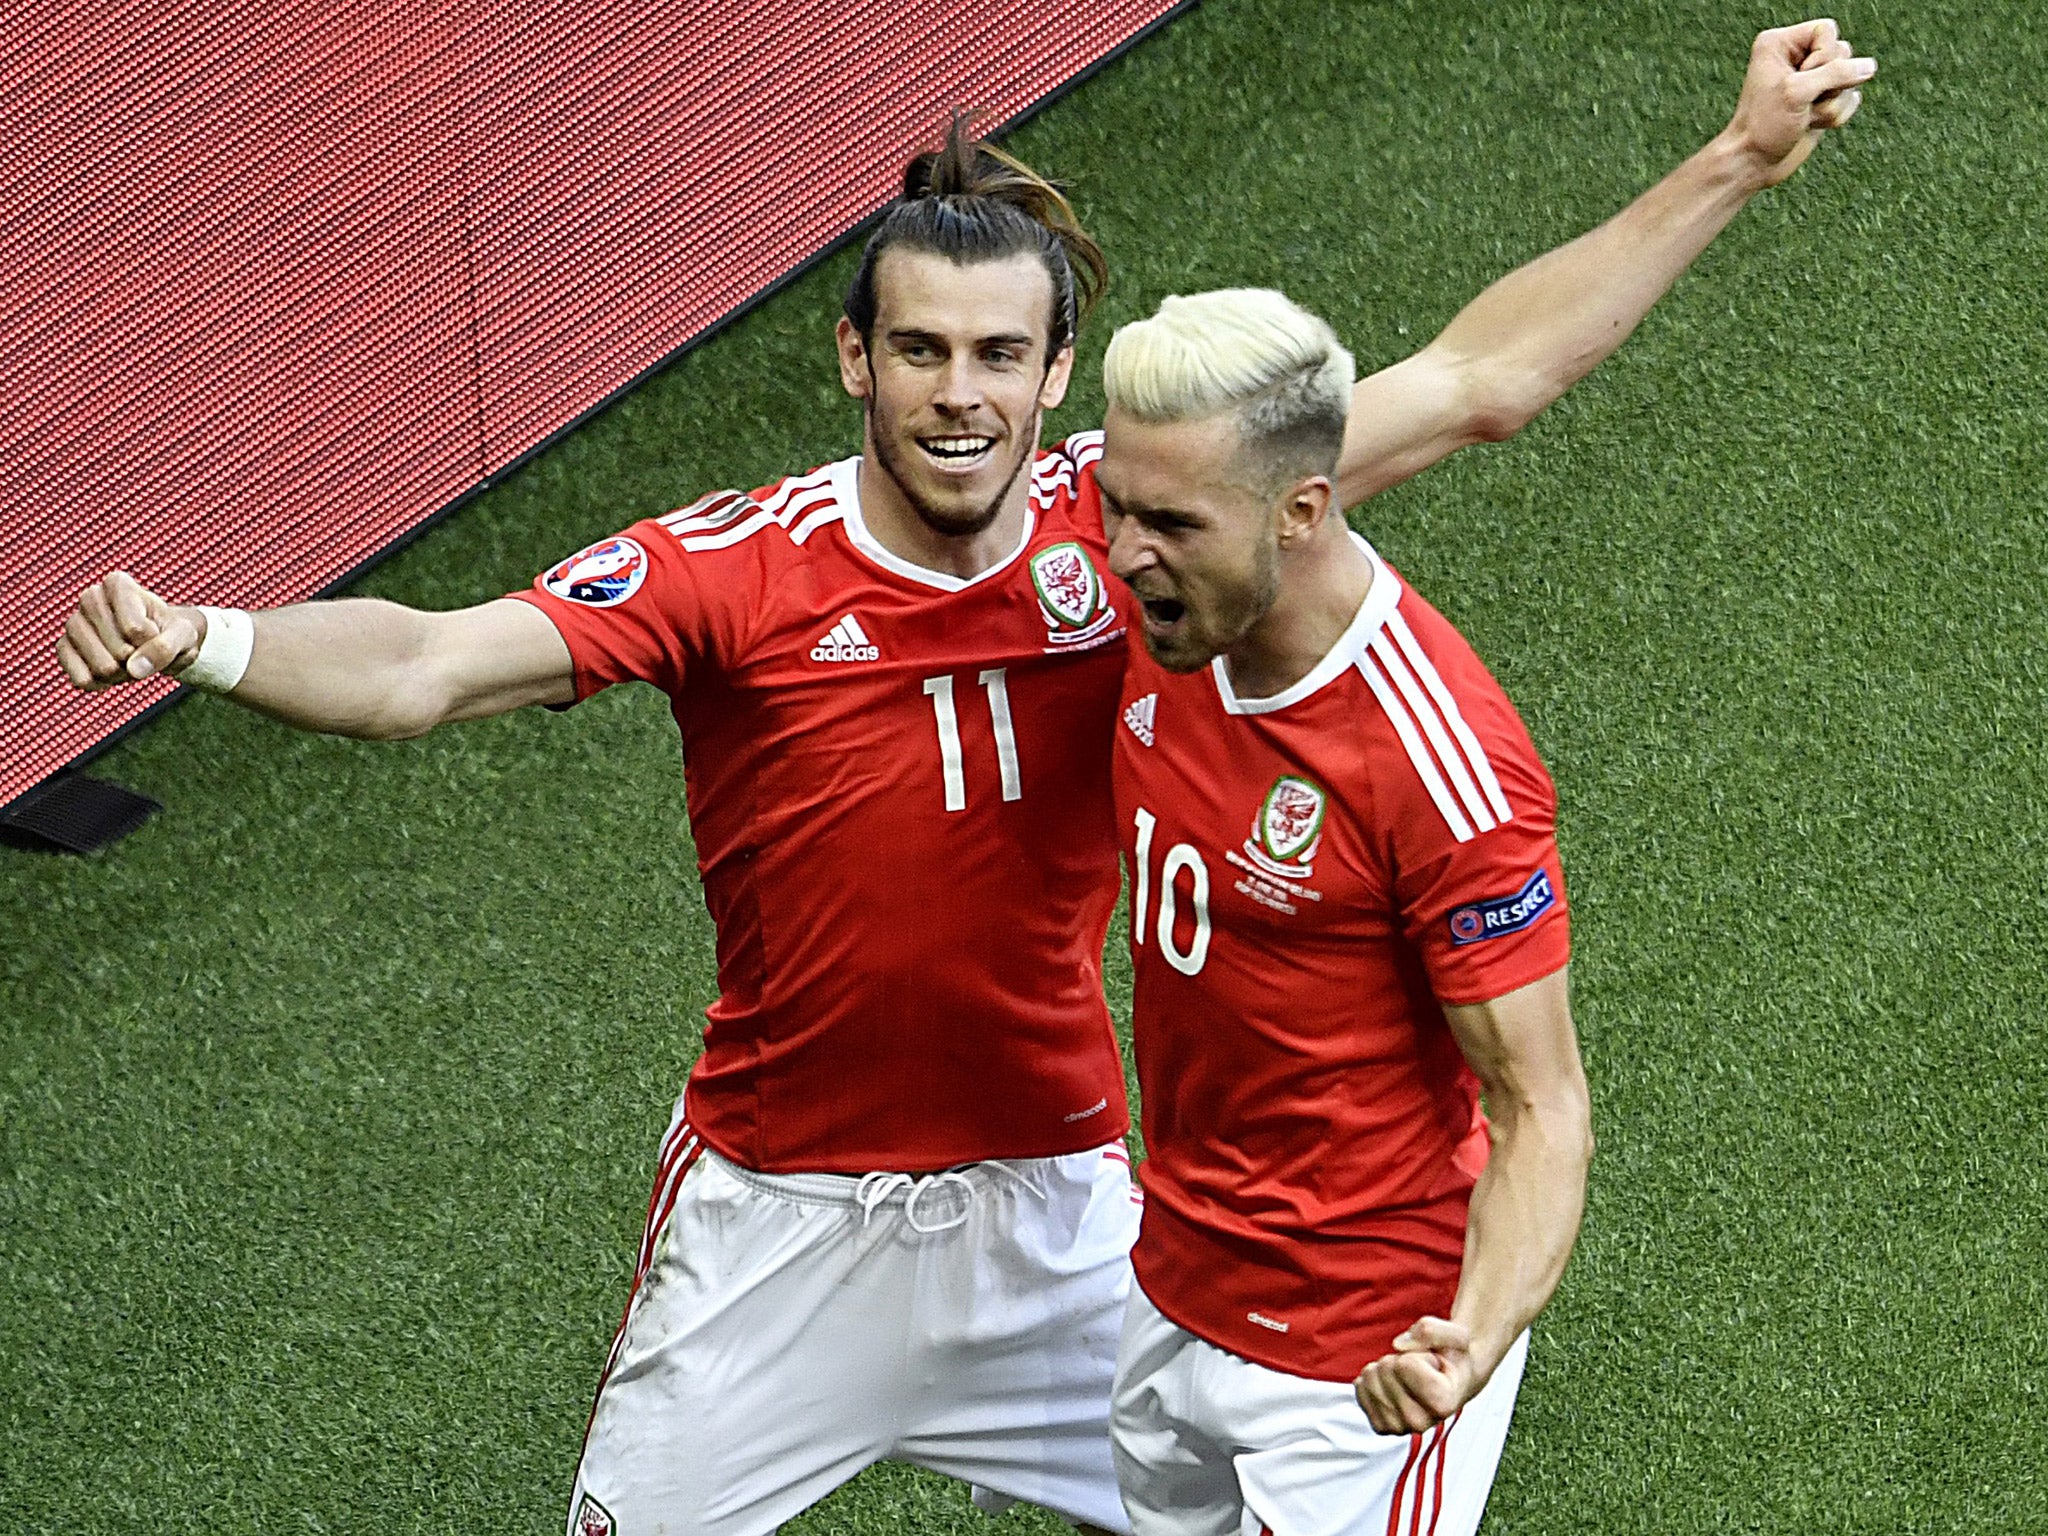 Gareth Bale's brilliance, Chris Coleman's strength and the